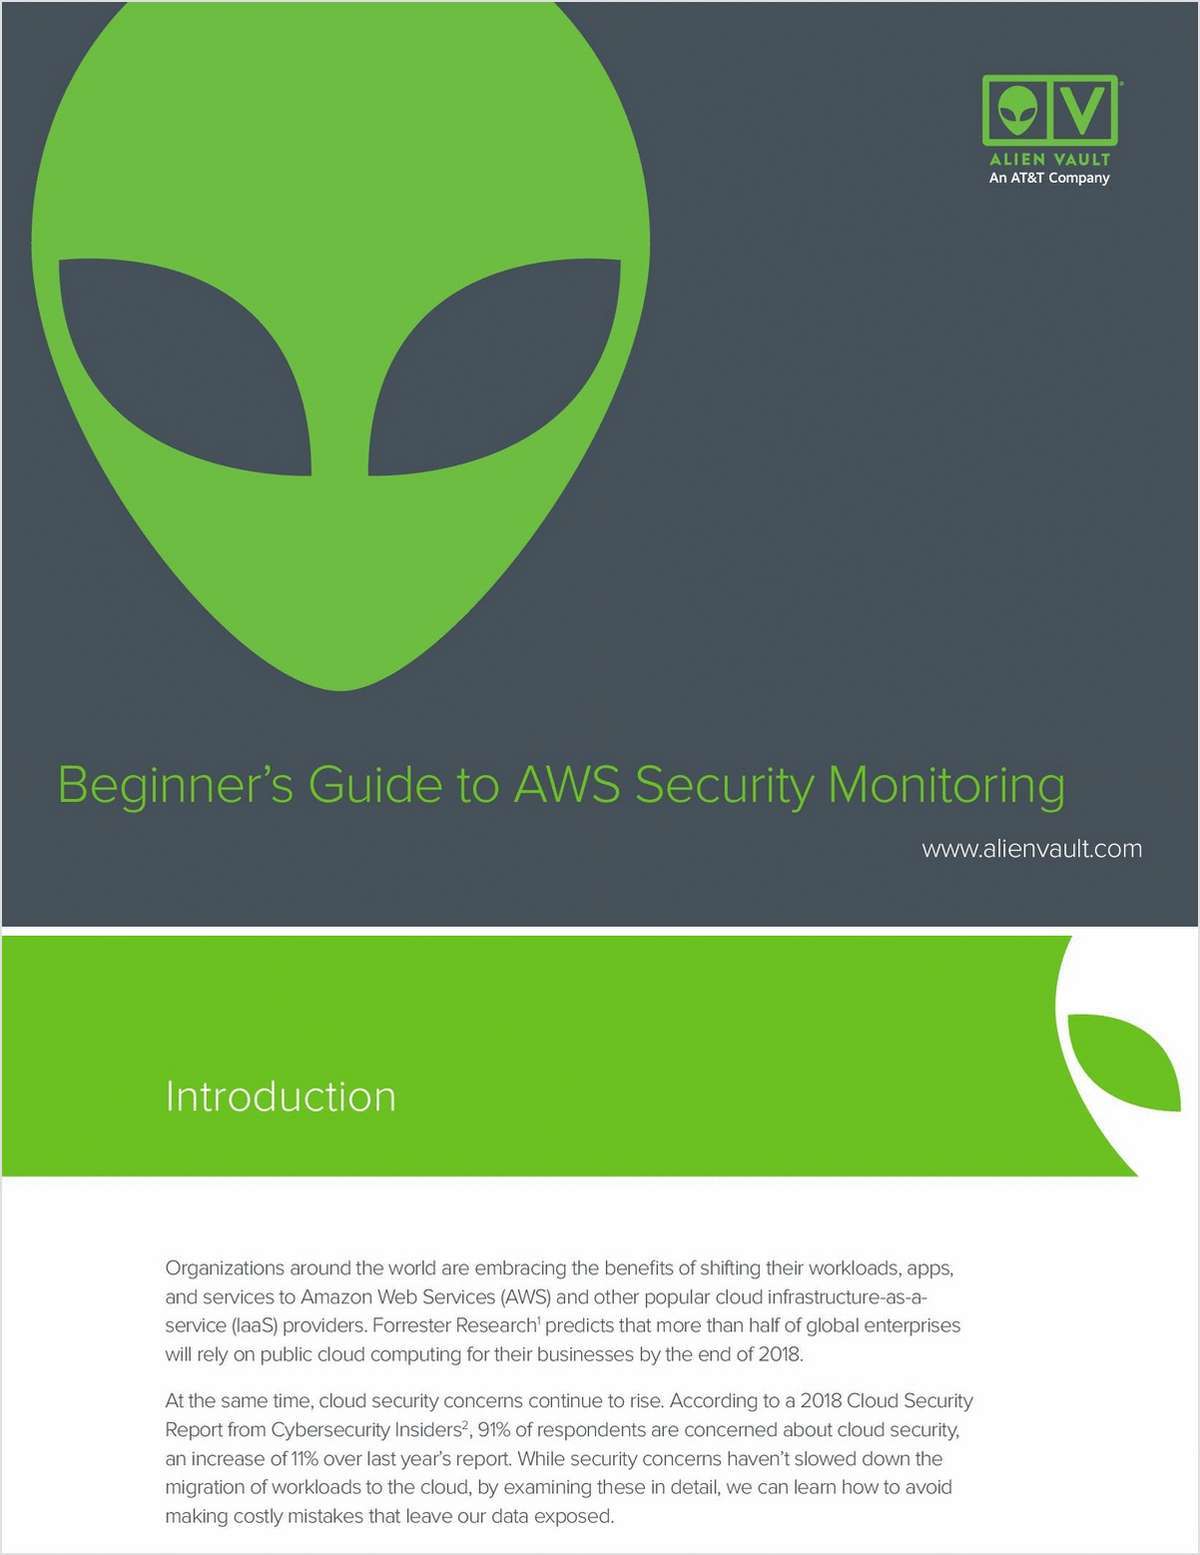 Beginner's Guide to AWS Security Monitoring